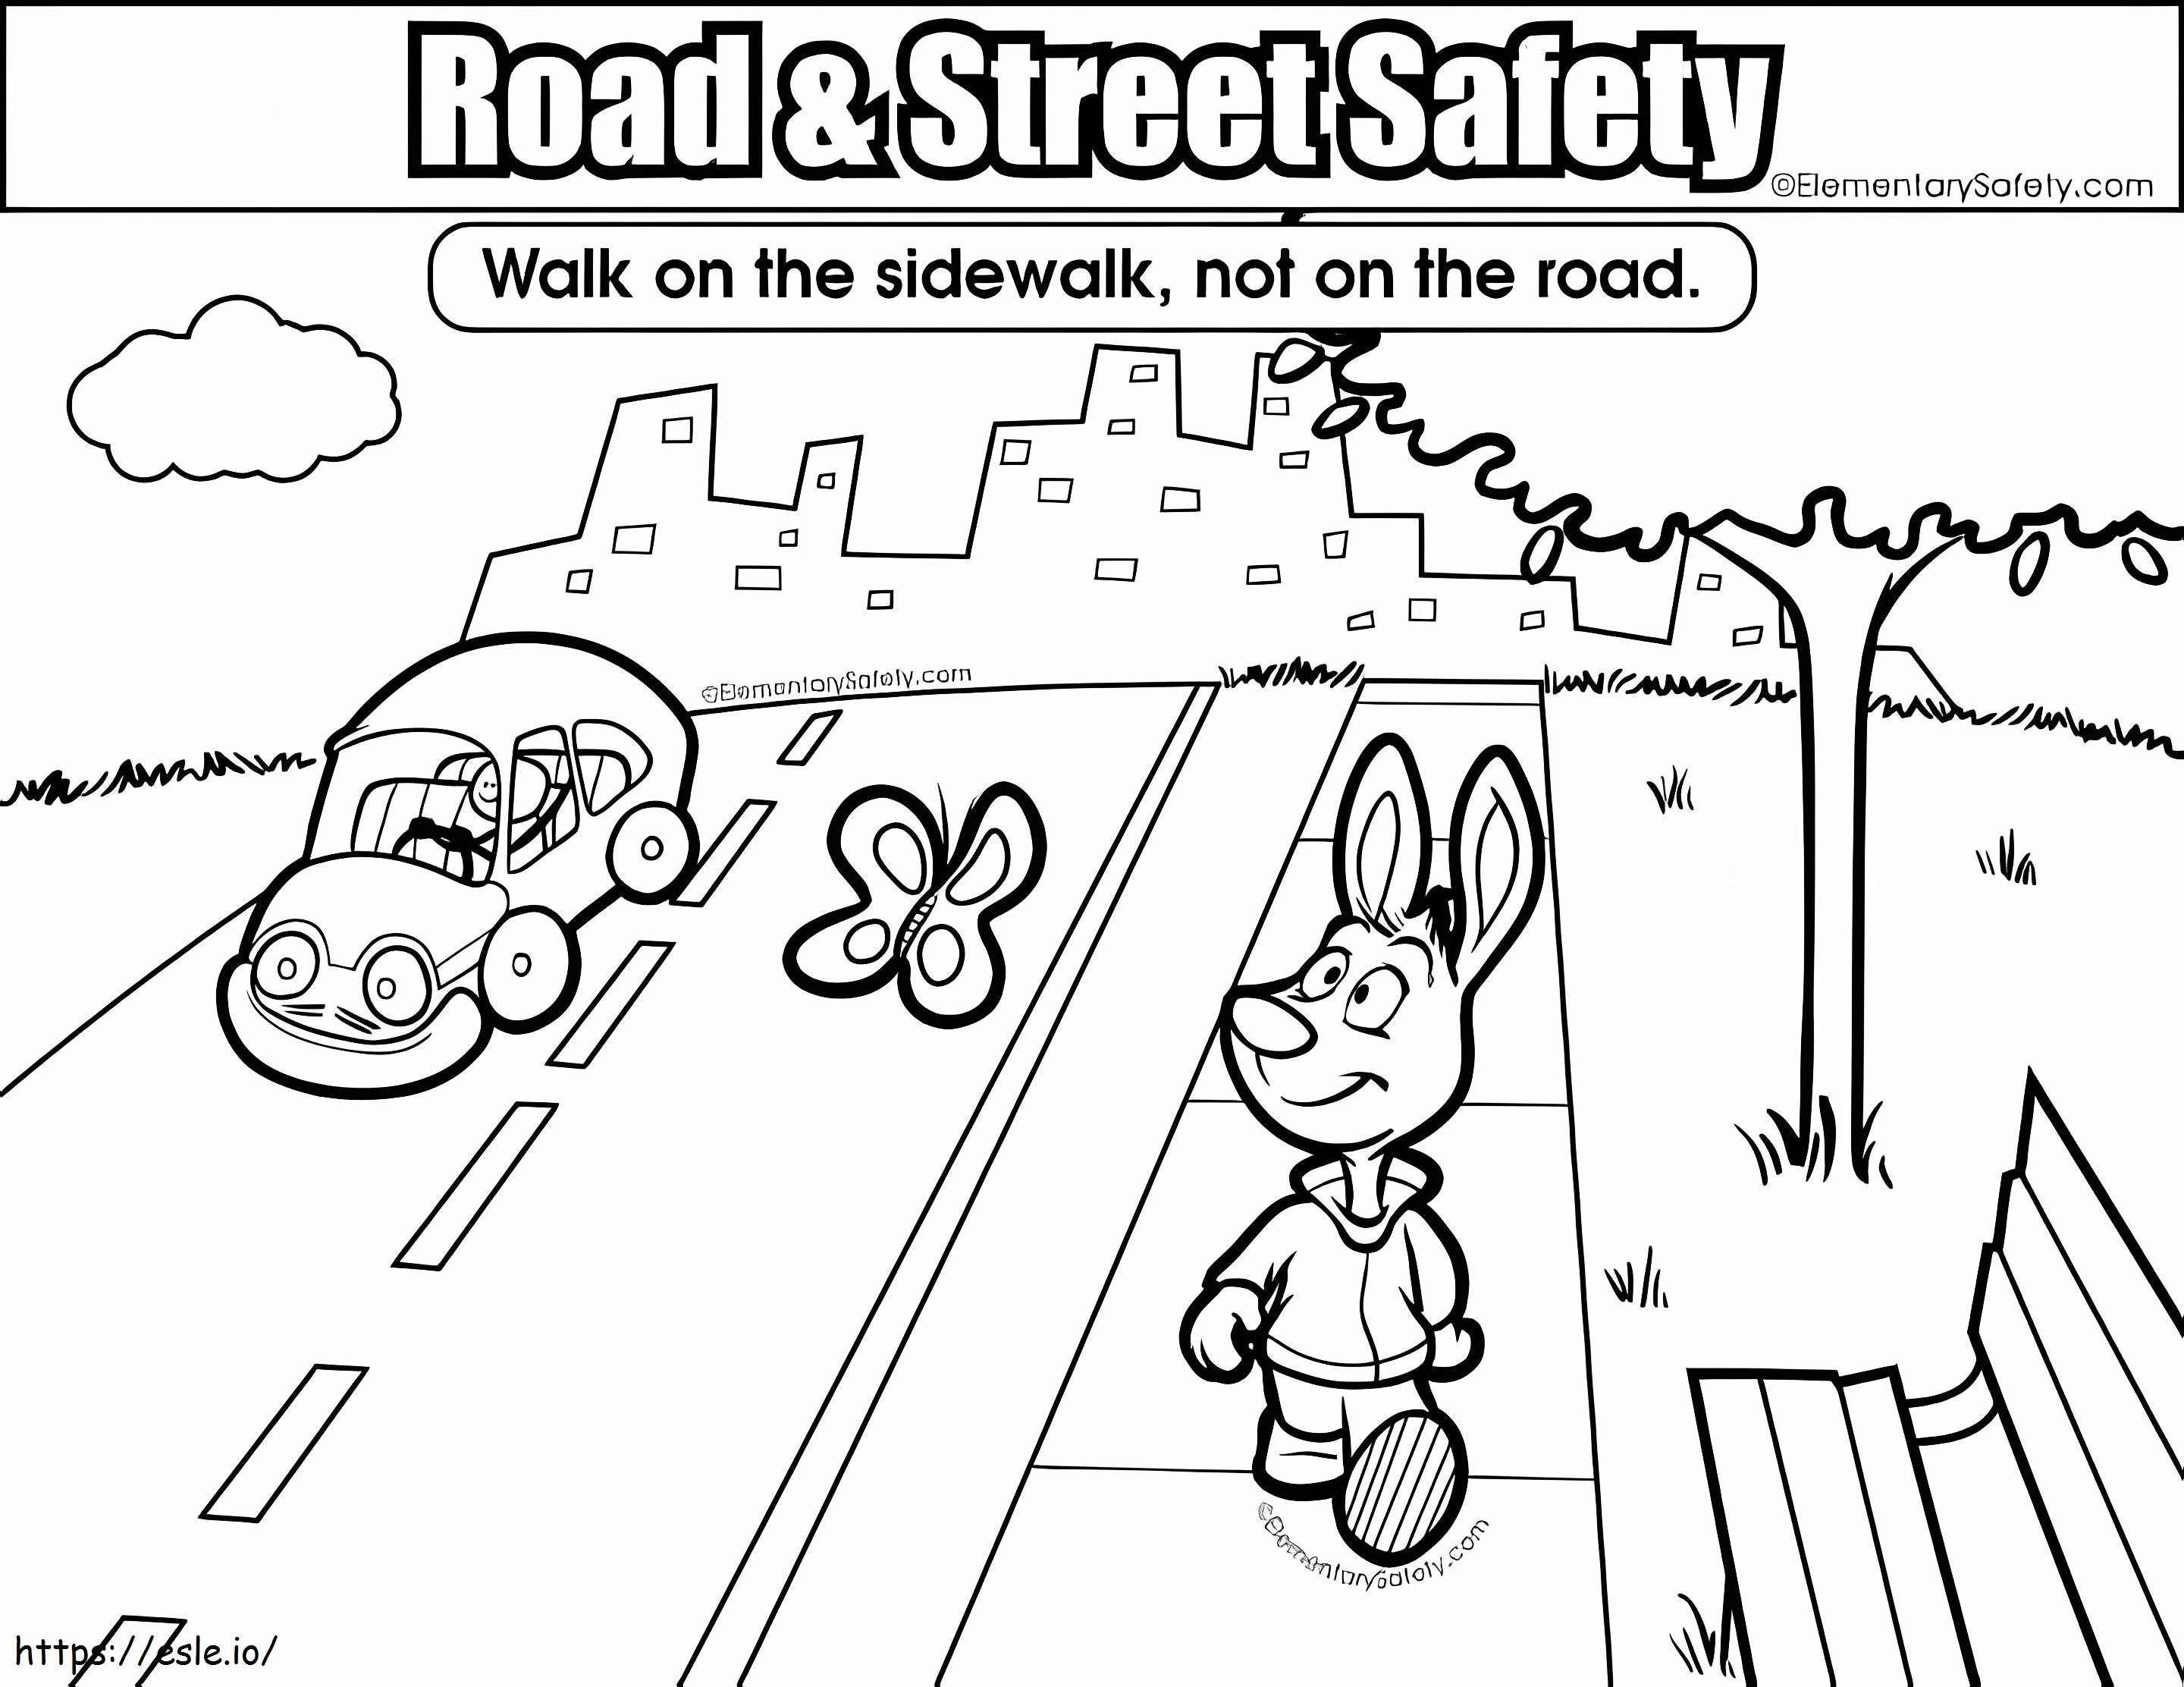 Sidewalk And Road coloring page